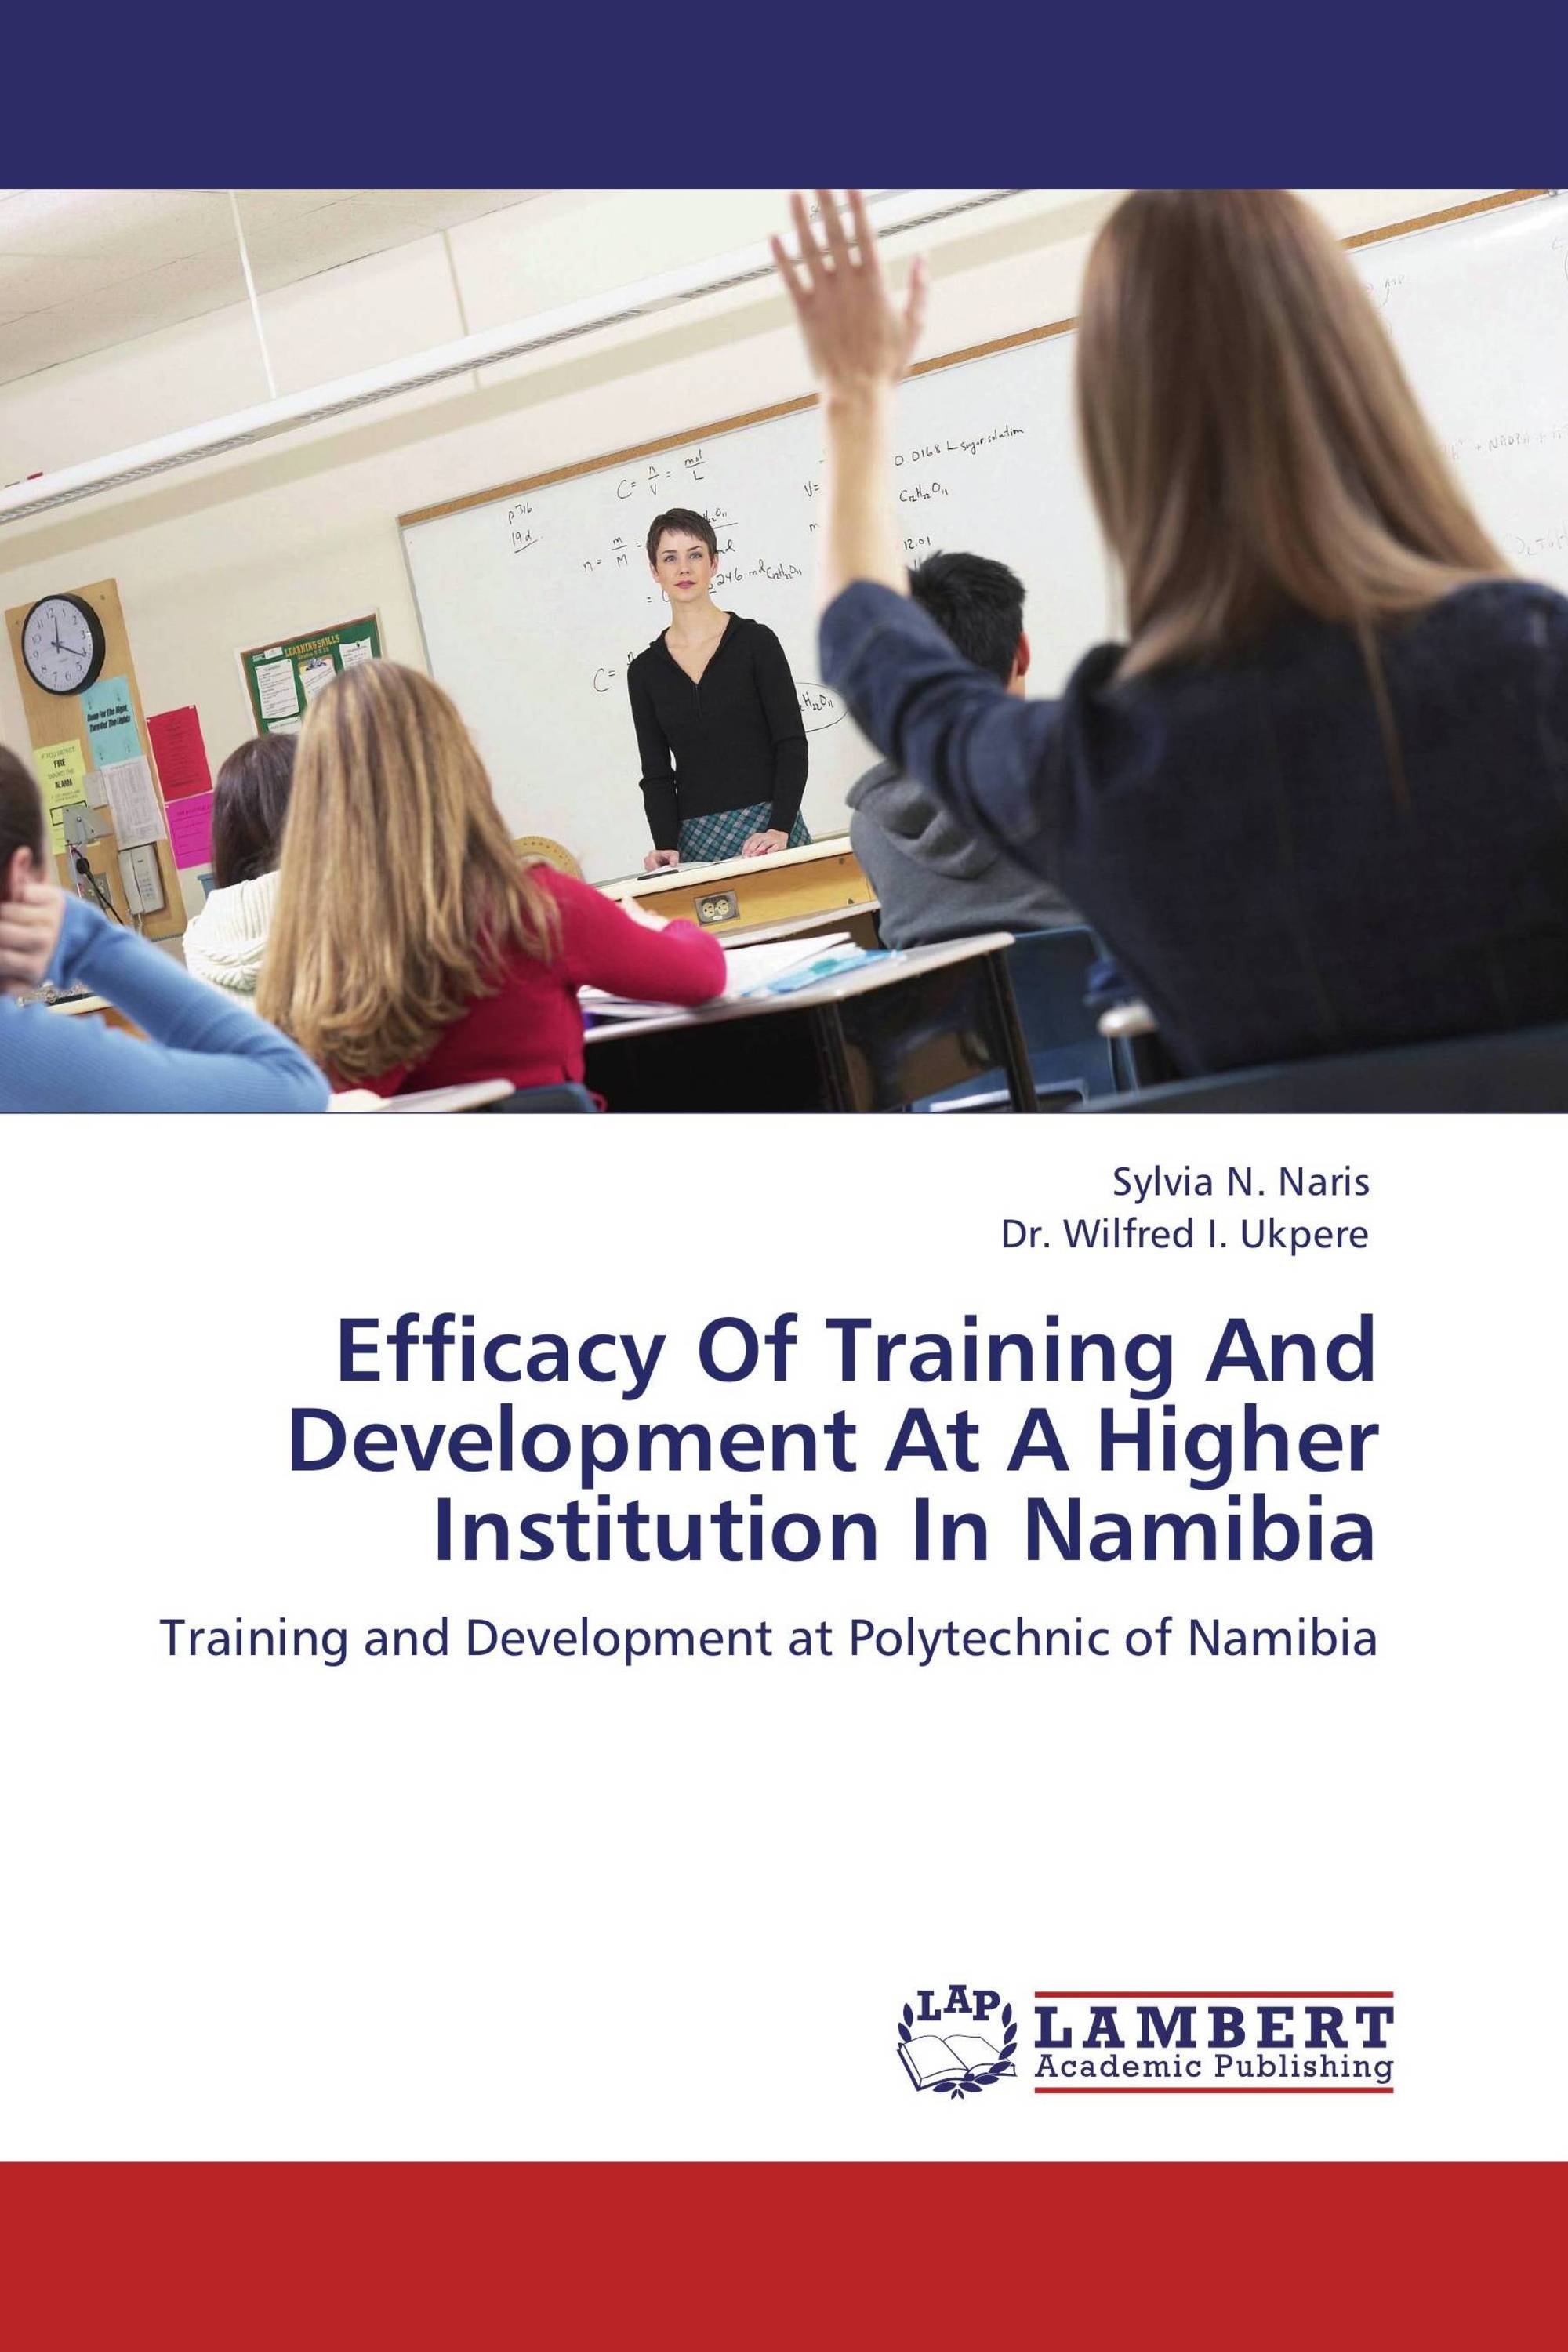 Efficacy Of Training And Development At A Higher Institution In Namibia